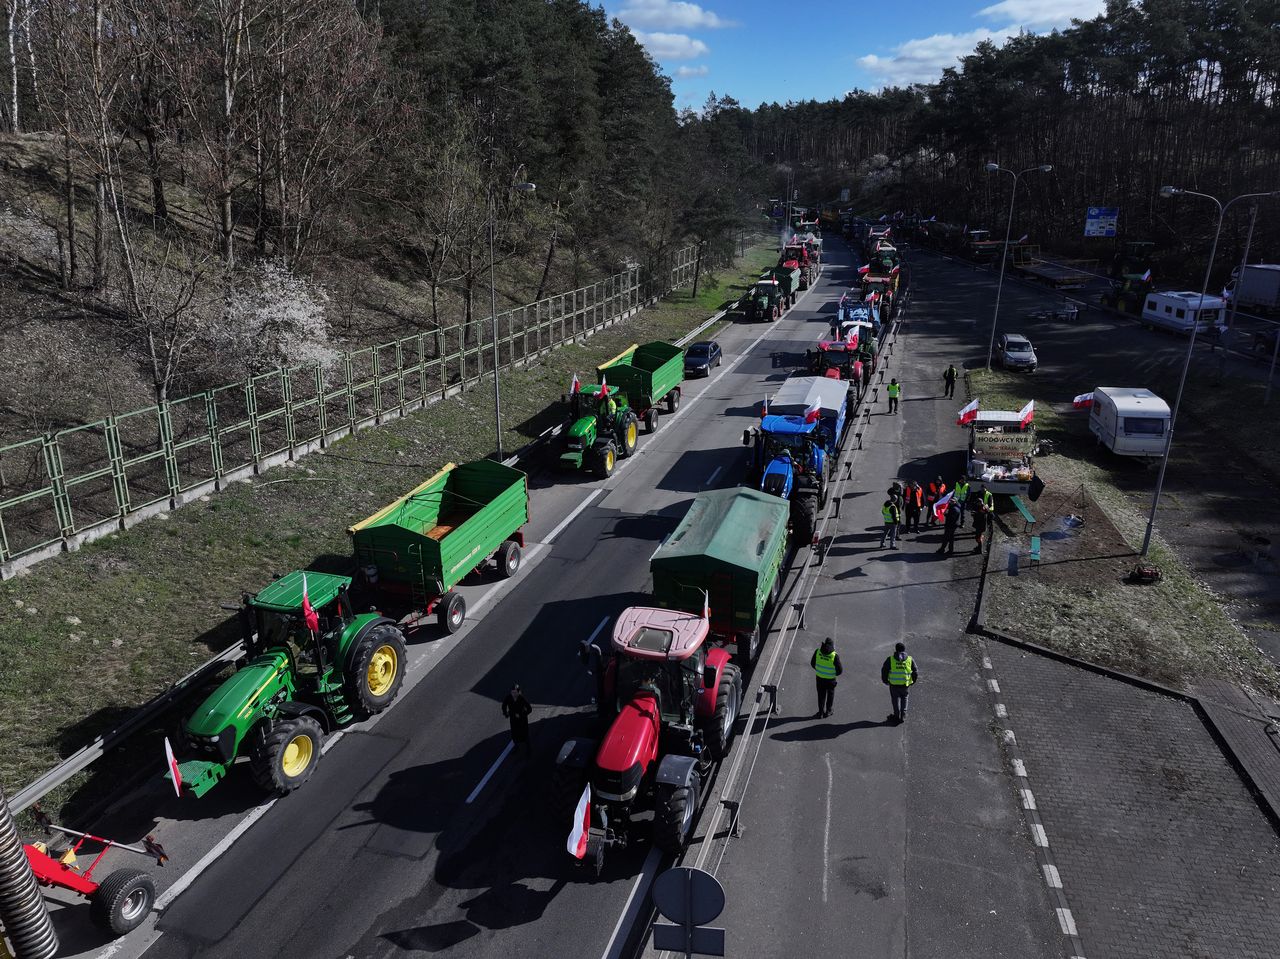 EU relaxes farm decarbonization rules amid widespread protests